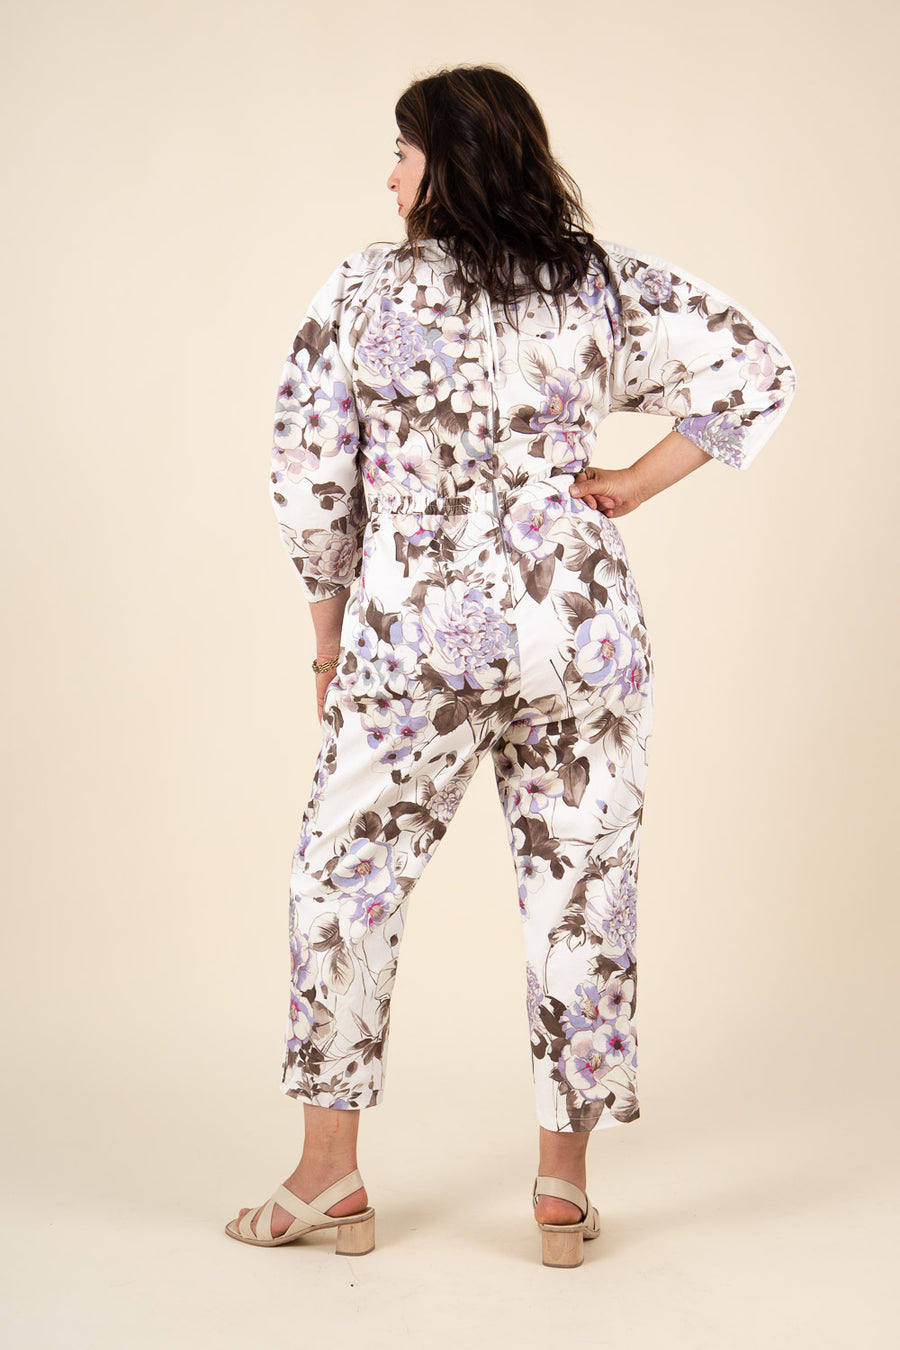 French Laundry, Pants & Jumpsuits, Floral Leggings